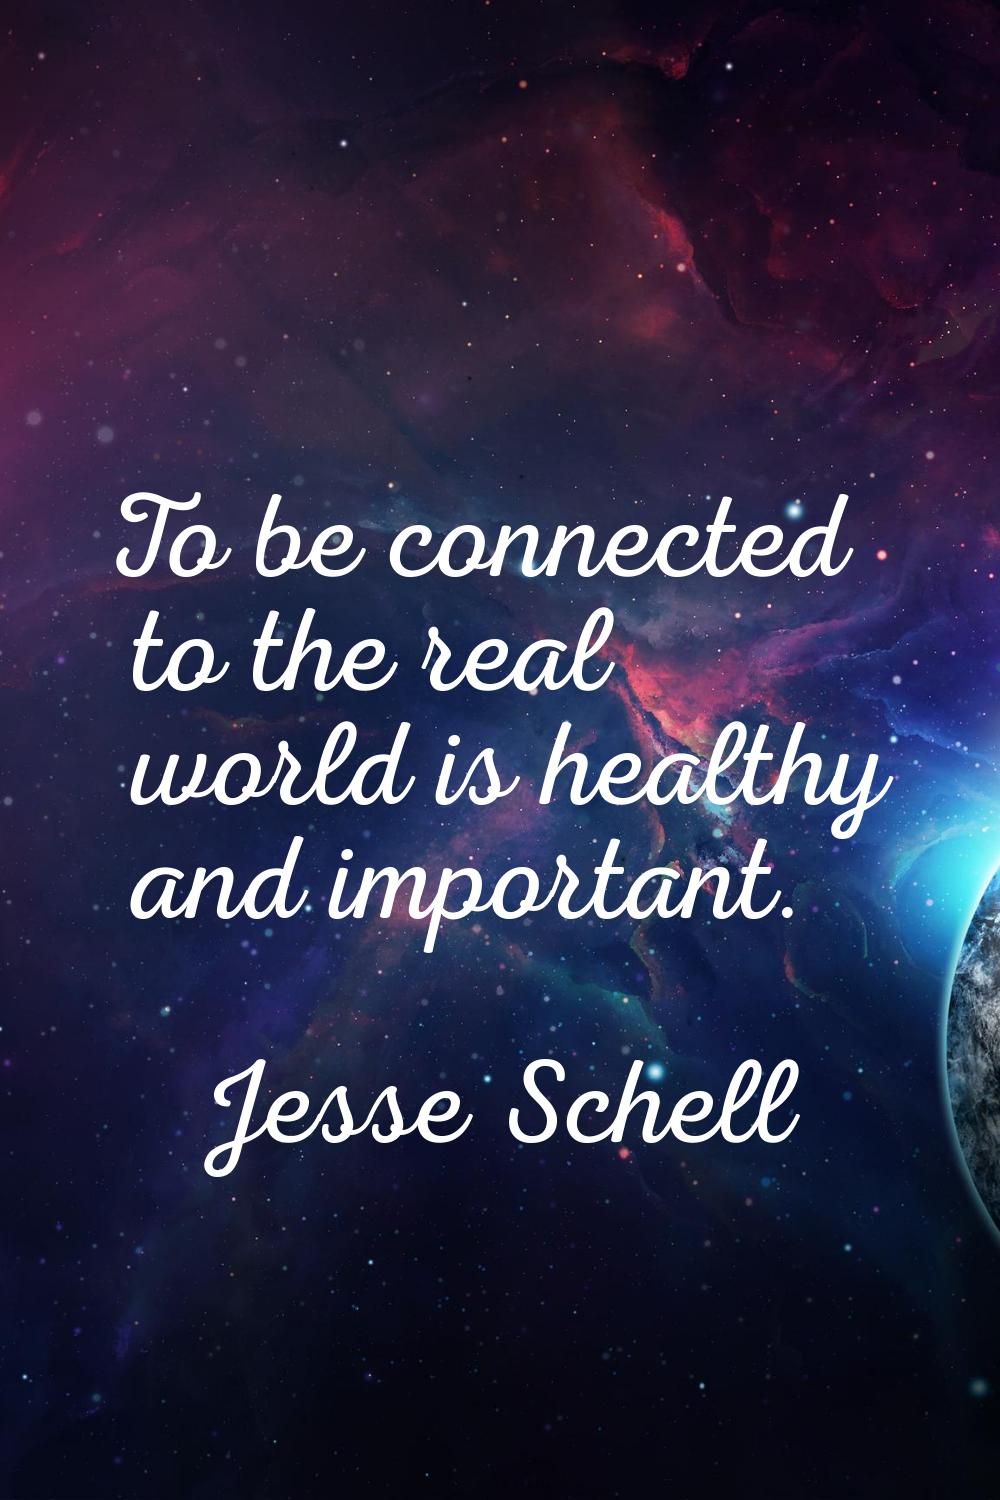 To be connected to the real world is healthy and important.